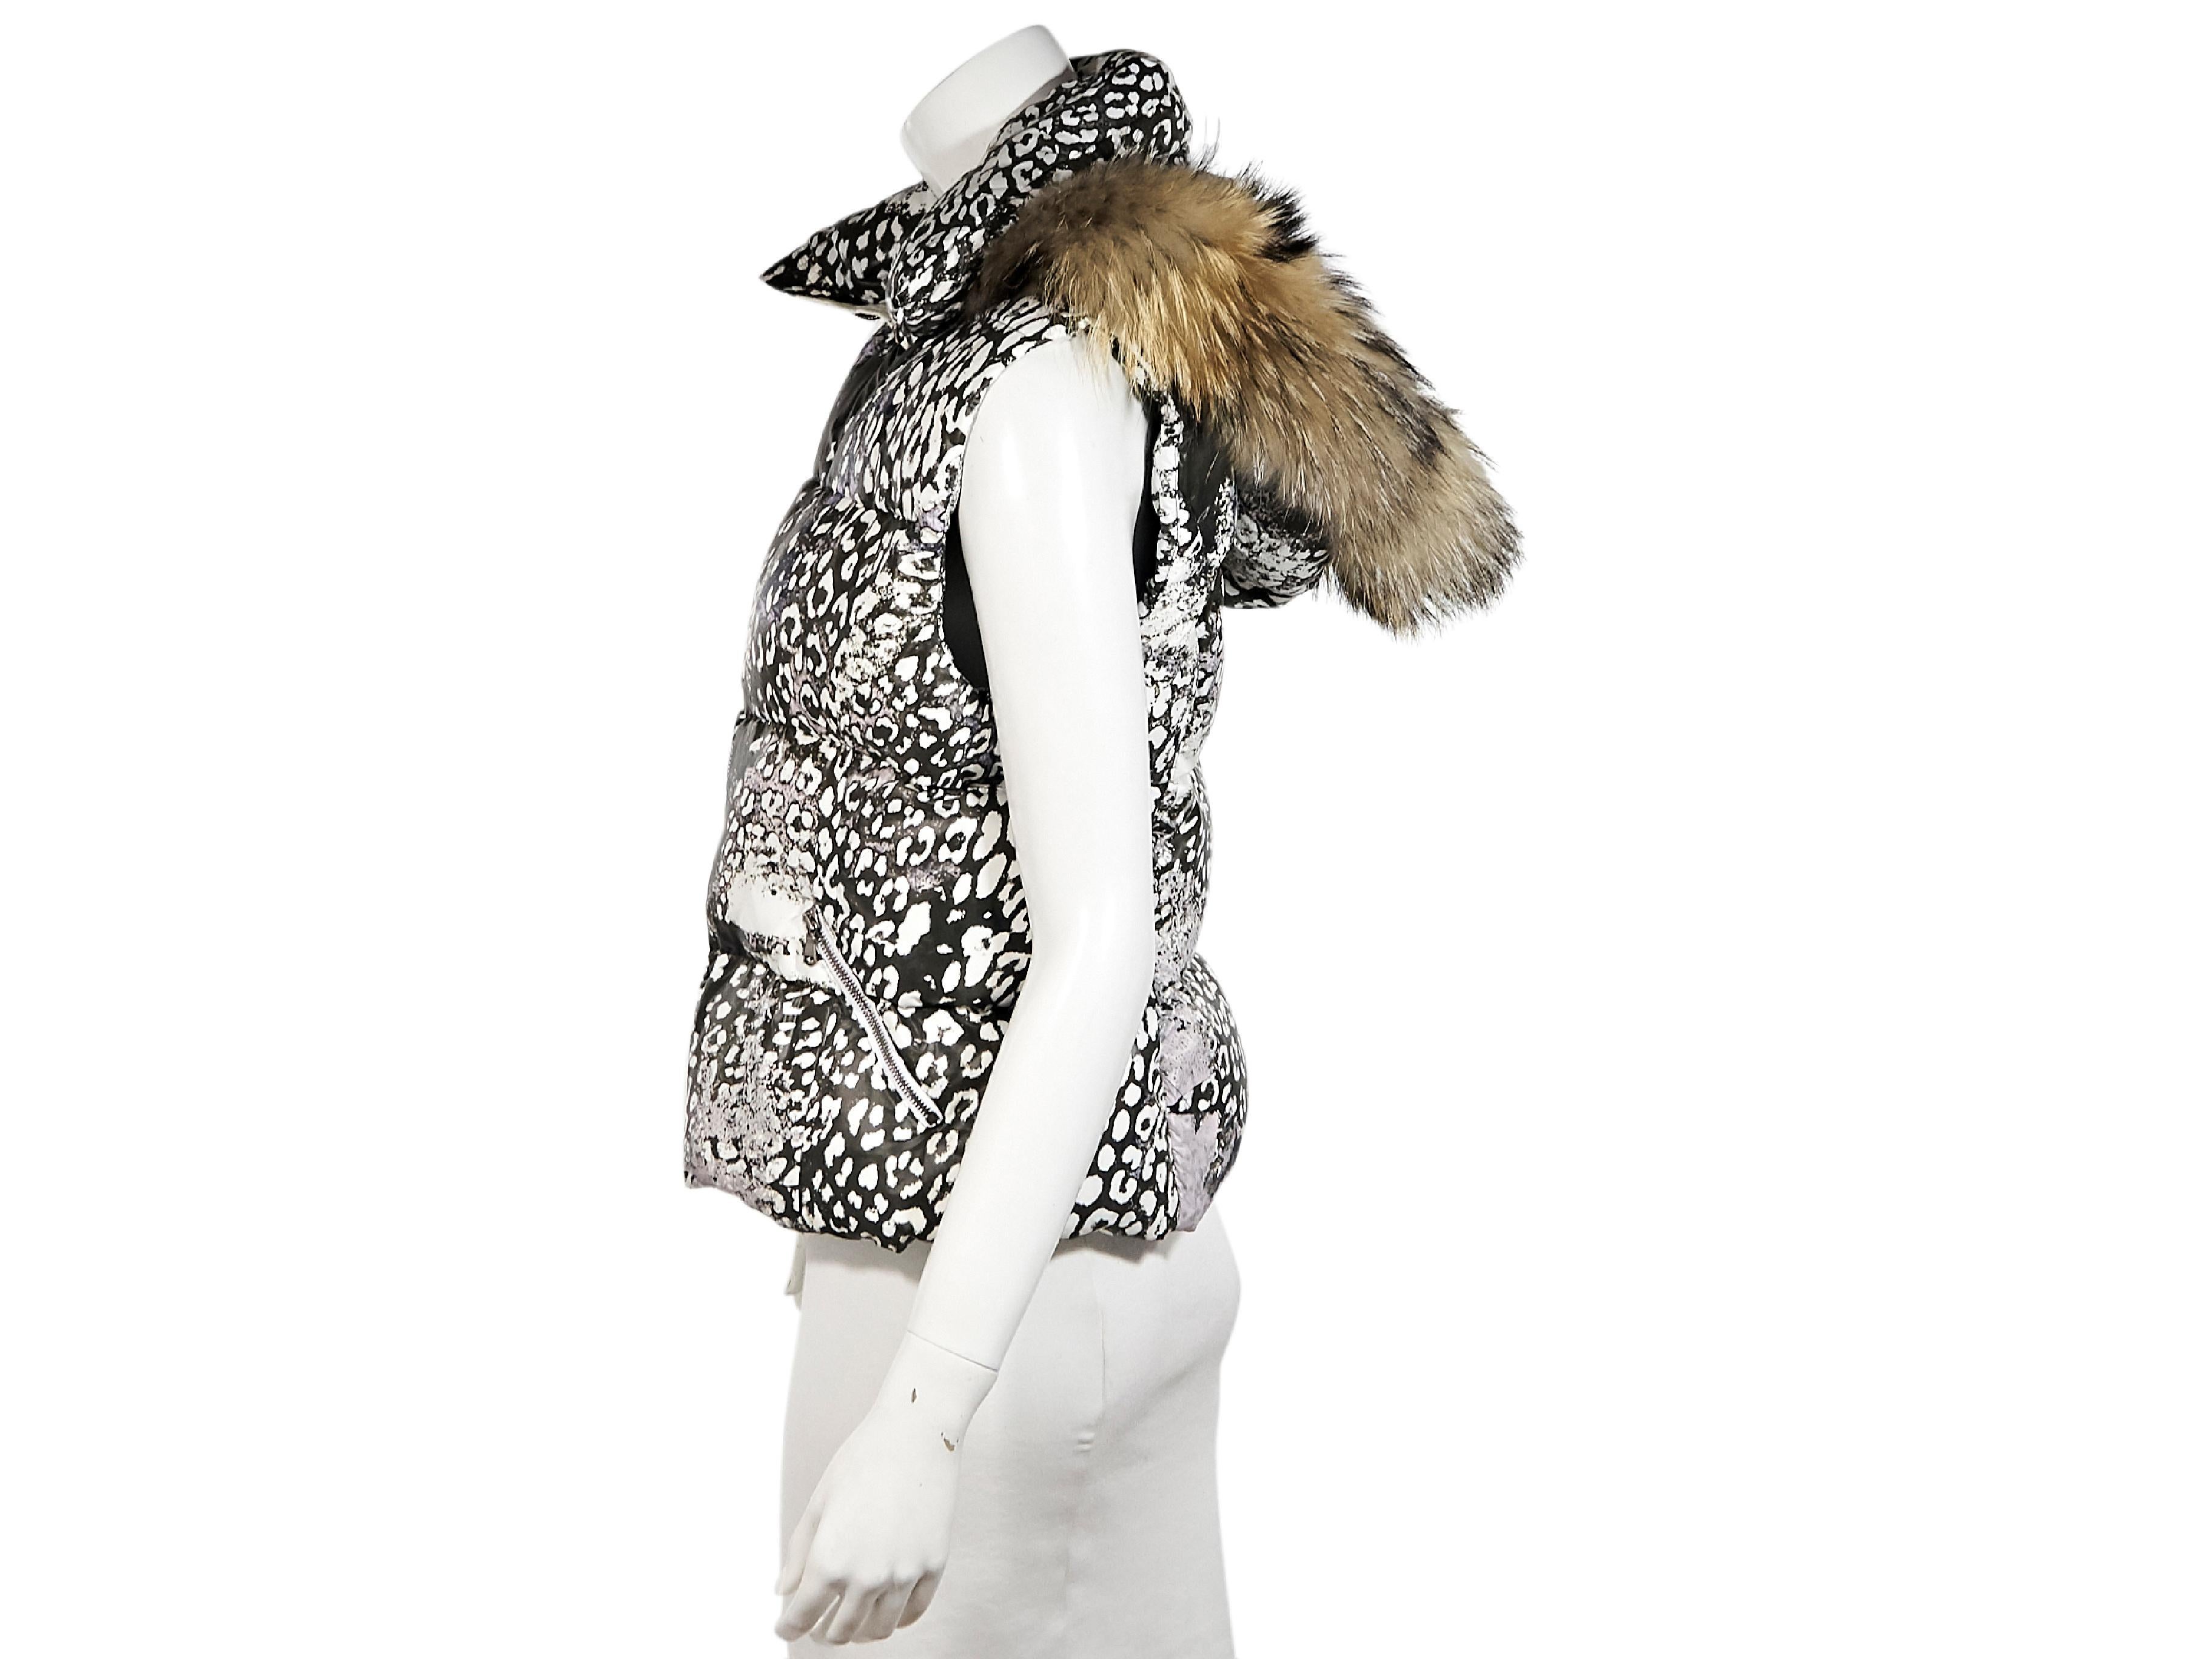 Product details:  Black and white animal-printed down vest by Emilio Pucci.  Stand collar.  Marmot fur-trimmed hood.  Zip-front closure.  Waist zip pockets.  38